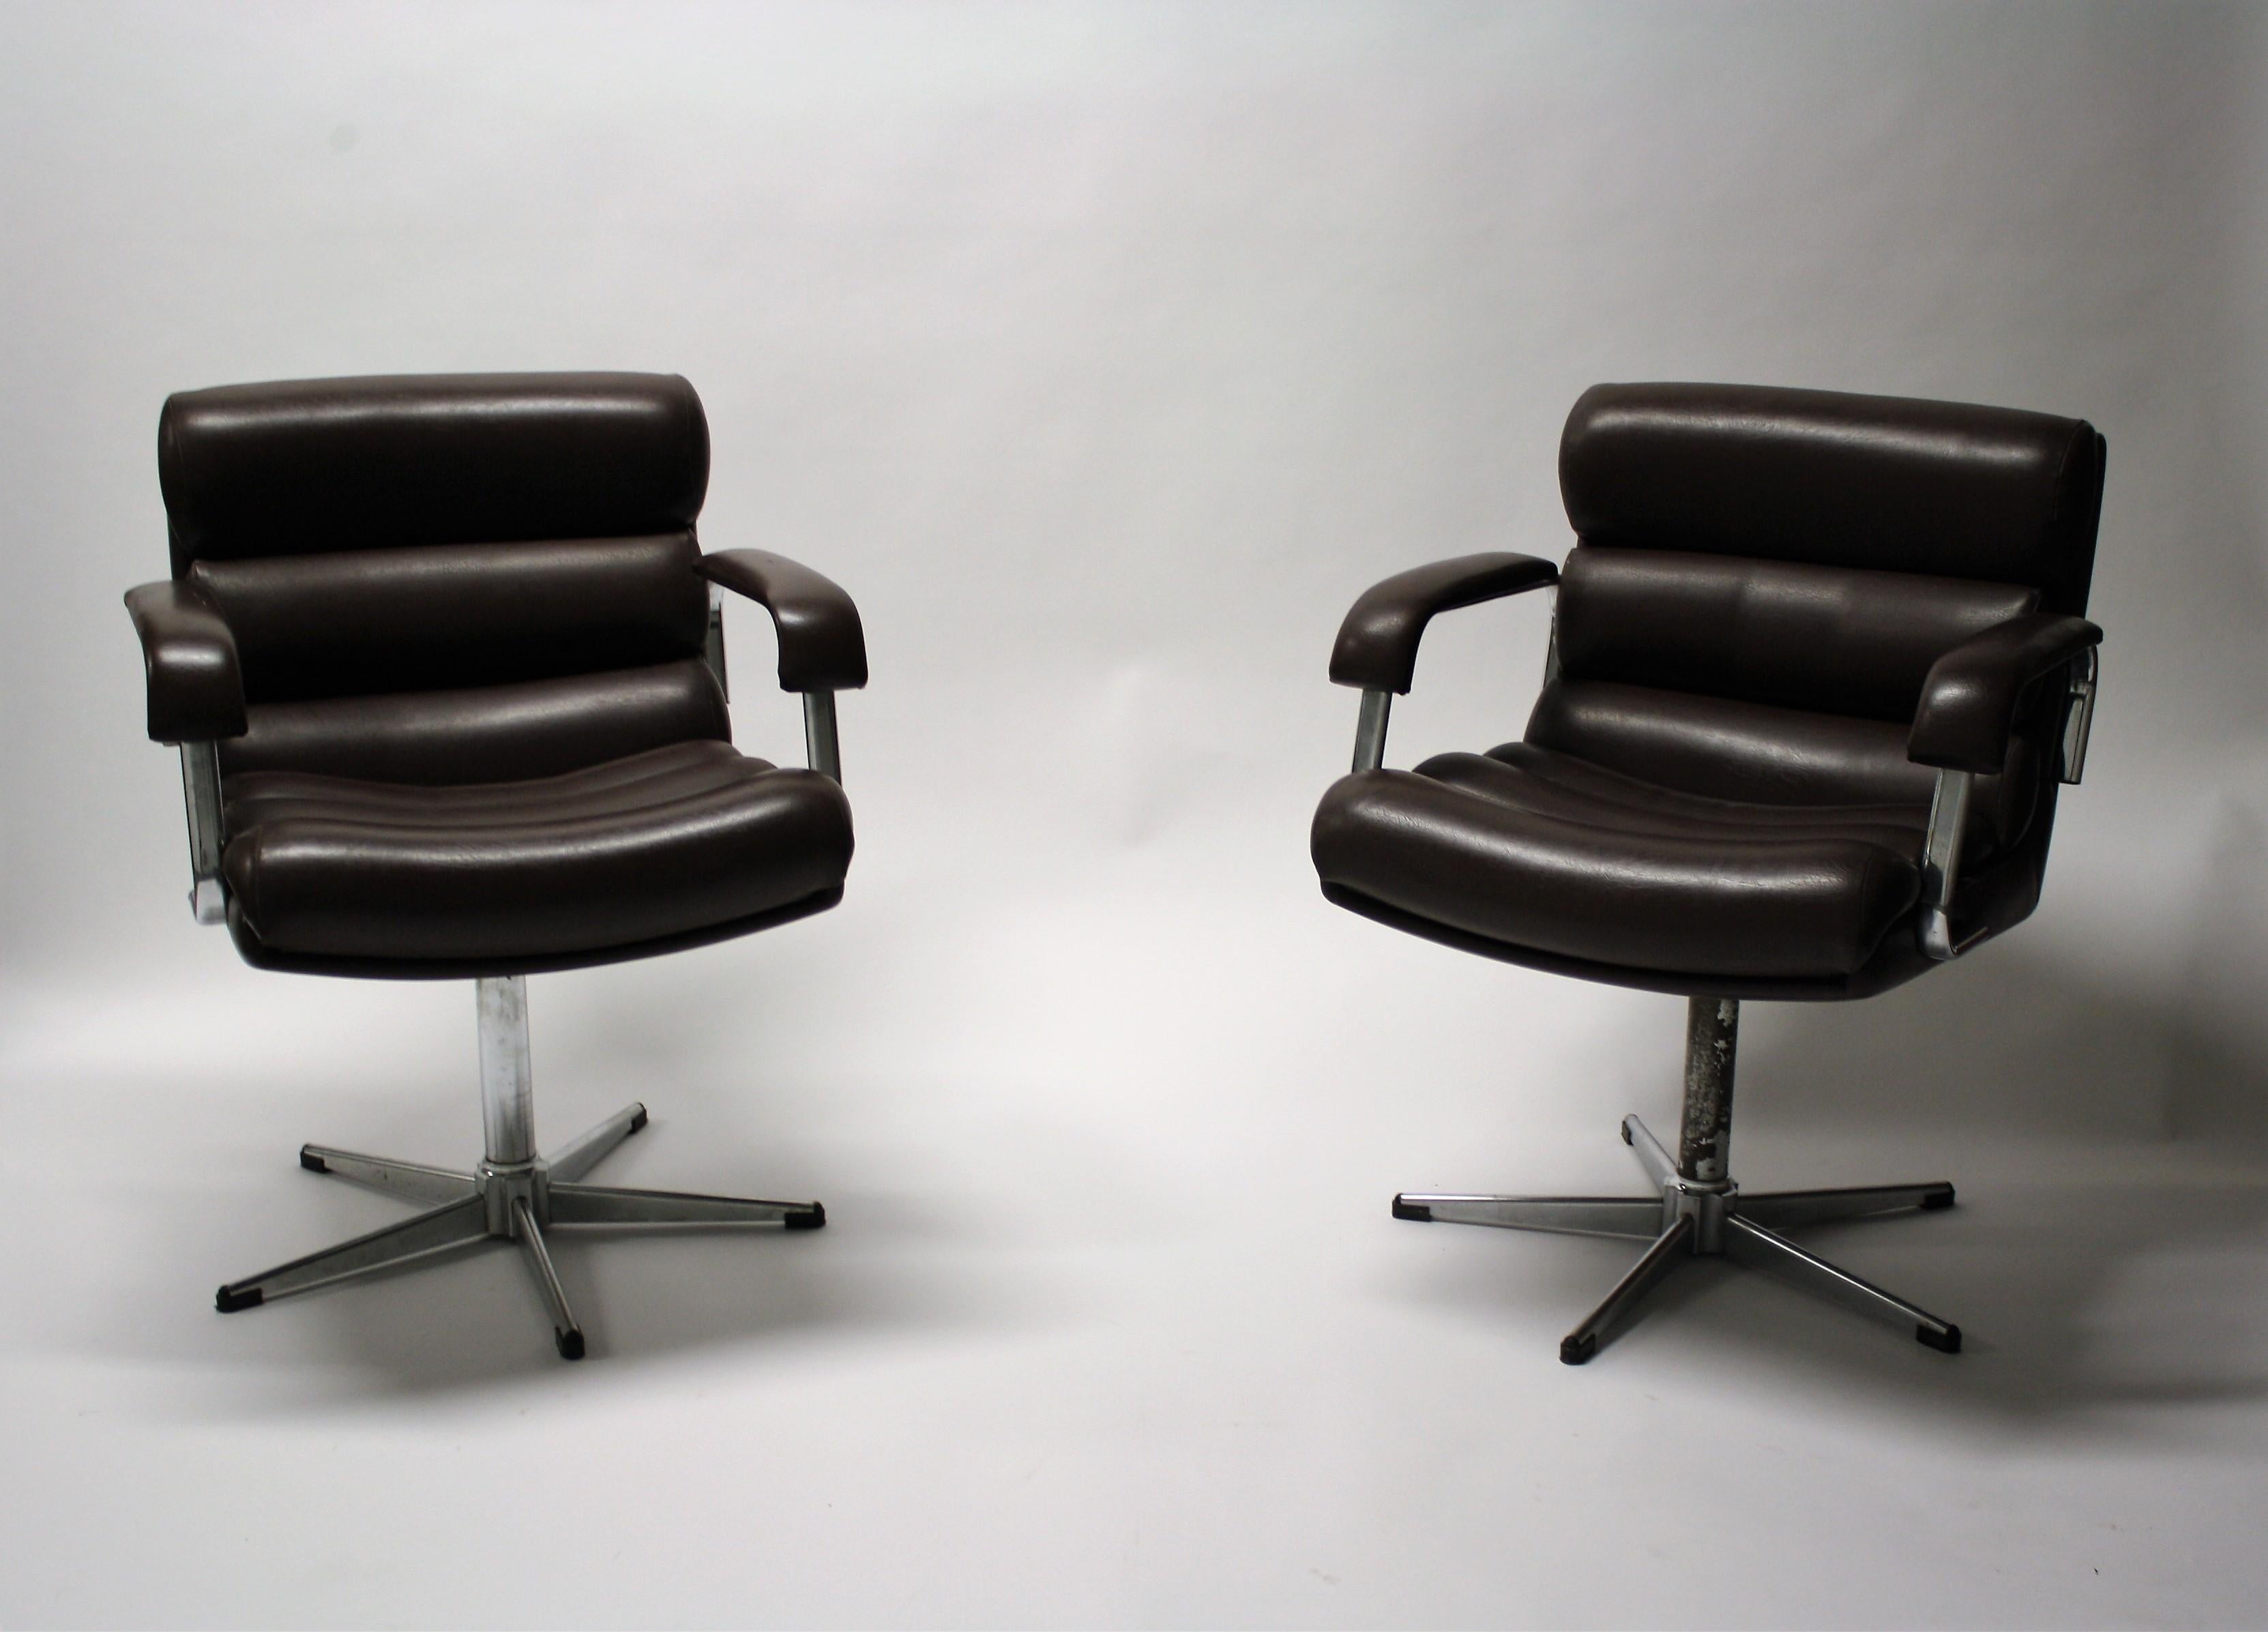 Pair of vintage skai desk chairs or lounge chairs.

The chairs consist of six individual cushions and armrests made of brown skai which makes the chairs very comfortable to sit in.

They have aluminum star shaped bases.

Good condition.

One